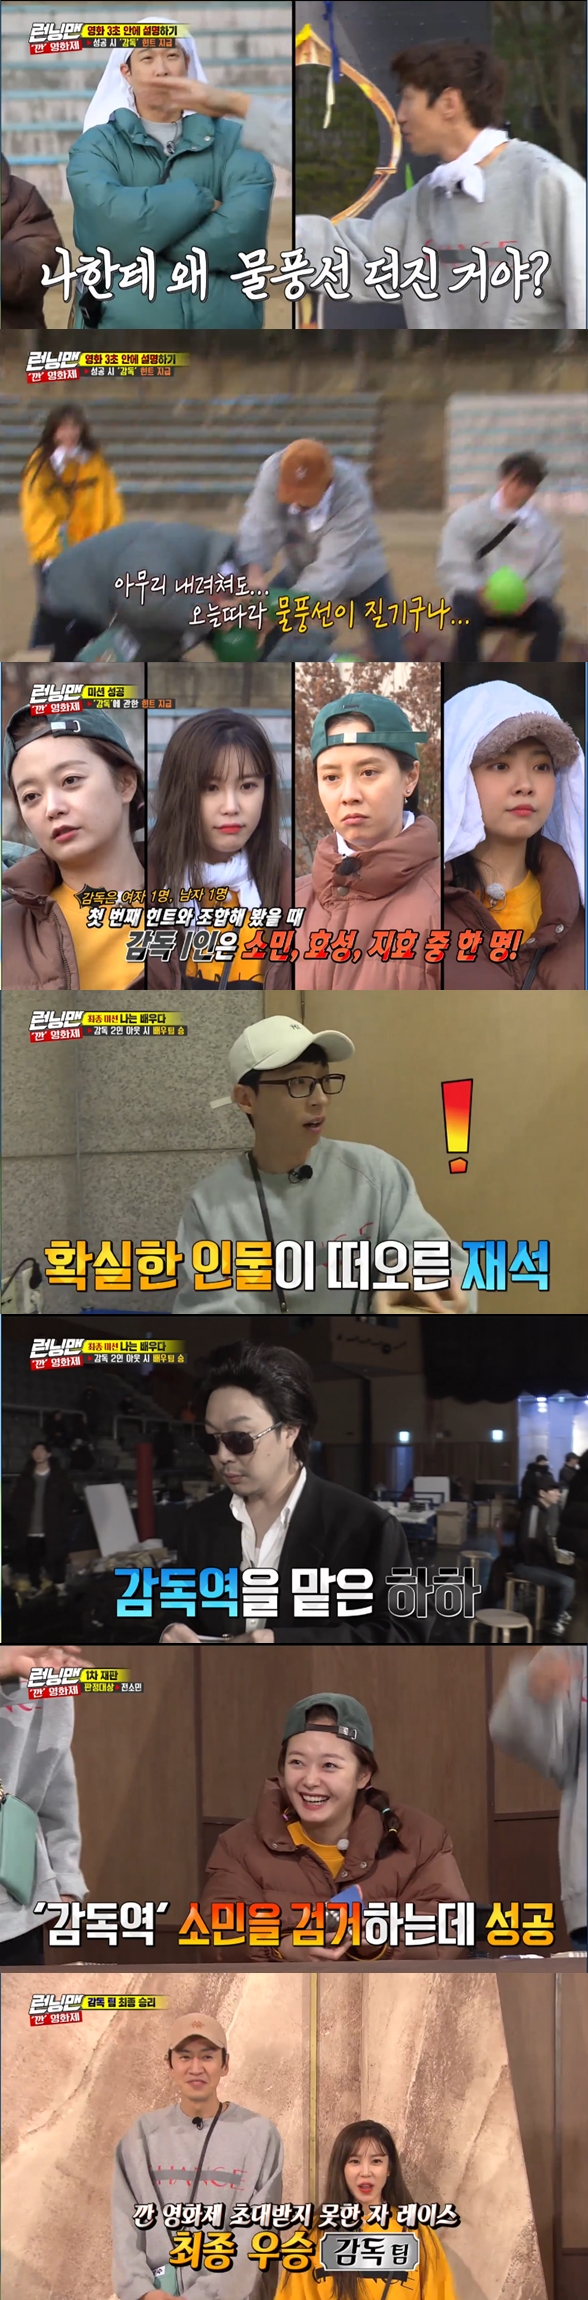 The team of coaches won the final.In the SBS entertainment program Running Man broadcasted on the 5th night, Kang Tae-oh, Yoyomi, Jun Hyoseong and Heo Kyung-hwan performed Kang Film Festival Race with the members as guests.Following last week, he continued his race to find the director: In the Explain in 3 Seconds of the Movie mission, members sent out suspected directors in the first round.But they didnt get a problem right: Yoo Jae-Suk, who watched it, rose with a pompous look, saying, Im going to have to step up.Yoo Jae-Suk, who voluntarily decided to make his first problem, showed him that he had put his hand in his pocket, saying, I am so relaxed now.But the word he shouted for three seconds was Al. The members were embarrassed to hear it, and eventually they did not get the right answer.Yoo Jae-Suk, who failed to make a problem, was laughed at by the members afterwards.Kim Jong-kook refrained from Yoo Jae-Suk, saying, Stay still.The rest of the members showed the power to hit all the problems after Yoo Jae-Suk.Yang Se-chan hit home by giving a perfect hint, The child goes up the mountain and meets her grandmother.Lee Kwang-soo then gave a perfect hint, Why is it this day? But Haha threw a water balloon at Lee Kwang-soo, who gave a hint.Lee Kwang-soo, who was hit by the water, was embarrassed, and Kim Jong-kook asked, Why are you hit by water when you have a good hint? after being hit by August Christmas.Lee Kwang-soo was asked by Haha, and Haha excused him, saying, I thought it was our showdown.Kim Jong-kook began to suspect, You thought it was a confrontation because of the director Yi Gi.The members suspected of being a director candidate once again challenged the movie hit mission.Haha said to the members, Think about the amount, while making trouble, but the guests did not get the fun because of the many characteristics.Heo Kyung-hwan did not give a smile on this mission, and Yoo Jae-Suk, who watched it, laughed, saying, Kyung-hwan is not a no-jam.However, he succeeded in the mission, and as a hint, he was able to exclude Yoyomi from the suspect line by receiving the director is more than three years his debut.The final mission to find the director has begun. Each member spoke of the candidates they suspected.Yang Se-chan pointed to Heo Kyung-hwan and laughed, saying, I want to take the last amount.Heo Kyung-hwan had hints about the director from the start and Kim Jong-kook and Gong Yoo.Song Ji-hyo, who watched the two people go to the hint, said, Now the female director seems to be narrowing down to me and Somin.When Kim Jong-kook asked, Why are you sure of Jeon So-min? Song Ji-hyo avoided eye contact, saying, Did not the behavior from the car be strange?At that point, Yoo Jae-Suk found a tablet PC with hints.Inside the tablet PC, there was a video of I wanted to know, and in the video, Director A is related to a member who shed tears at the Running Gu concert.Seeing this, Yoo Jae-Suk suspected Song Ji-hyo, who shed tears at the concert.Jeon So-min found hints about the national actor, but did not have Song Ji-hyo and Gong Yoo suspected of being the director.Haha also found a video hint, and in the video, National Actor is using his stage name.Haha, who was in charge of the director, was convinced of Kang Tae-oh as an Actor and he got his name tag.But he was a regular Actor, and Haha began to suspect Yoyomi.When Haha had a Kang Tae-oh, Yoo Jae-Suk appeared on the spot; Yoo Jae-Suk began to suspect Haha as the director.But Haha said, I thought I was a director because of the national actorYi Gi and I removed it.After 30 minutes, the trial was held, and the members gathered in one place to start discussions to find the director.Yoo Jae-Suk told the members what he witnessed, but the members suspected Haha as a national actor.After agreeing to find the female director first, he narrowed the director candidate with Jeon So-min and Song Ji-hyo; the members set up Jeon So-min on the trial after the troubles.But she was the Actor in charge of the director, and the Race unfolded again.The members found out through hints that Haha was also a fake director.Also, the real director had to in-N-Out Burger the fake director to make the national actor in-N-Out Burger.Yang Se-chan, who appeared in front of the bewildered Haha, took his name tag.Jun Hyoseong had Yoo Jae-Suk, who doubted himself, in-N-Out Burger; Jun Hyoseong was the female director.Yang Se-chan has Jun Hyoseong in-N-Out Burger to make him believe Kim Jong-kook, who doubts him.Kim Jong-kook did not clear the doubt, saying it was Acting; the trial was then reopened, and the members put Yang Se-chan on trial.But behind Yang Se-chans back it says National Actor: Lee Kwang-soo, who was suspected together, cheered, and the coachs victory ended Race.Yang Se-chan laughed at Heo Kyung-hwan as a member of the water cannon together.